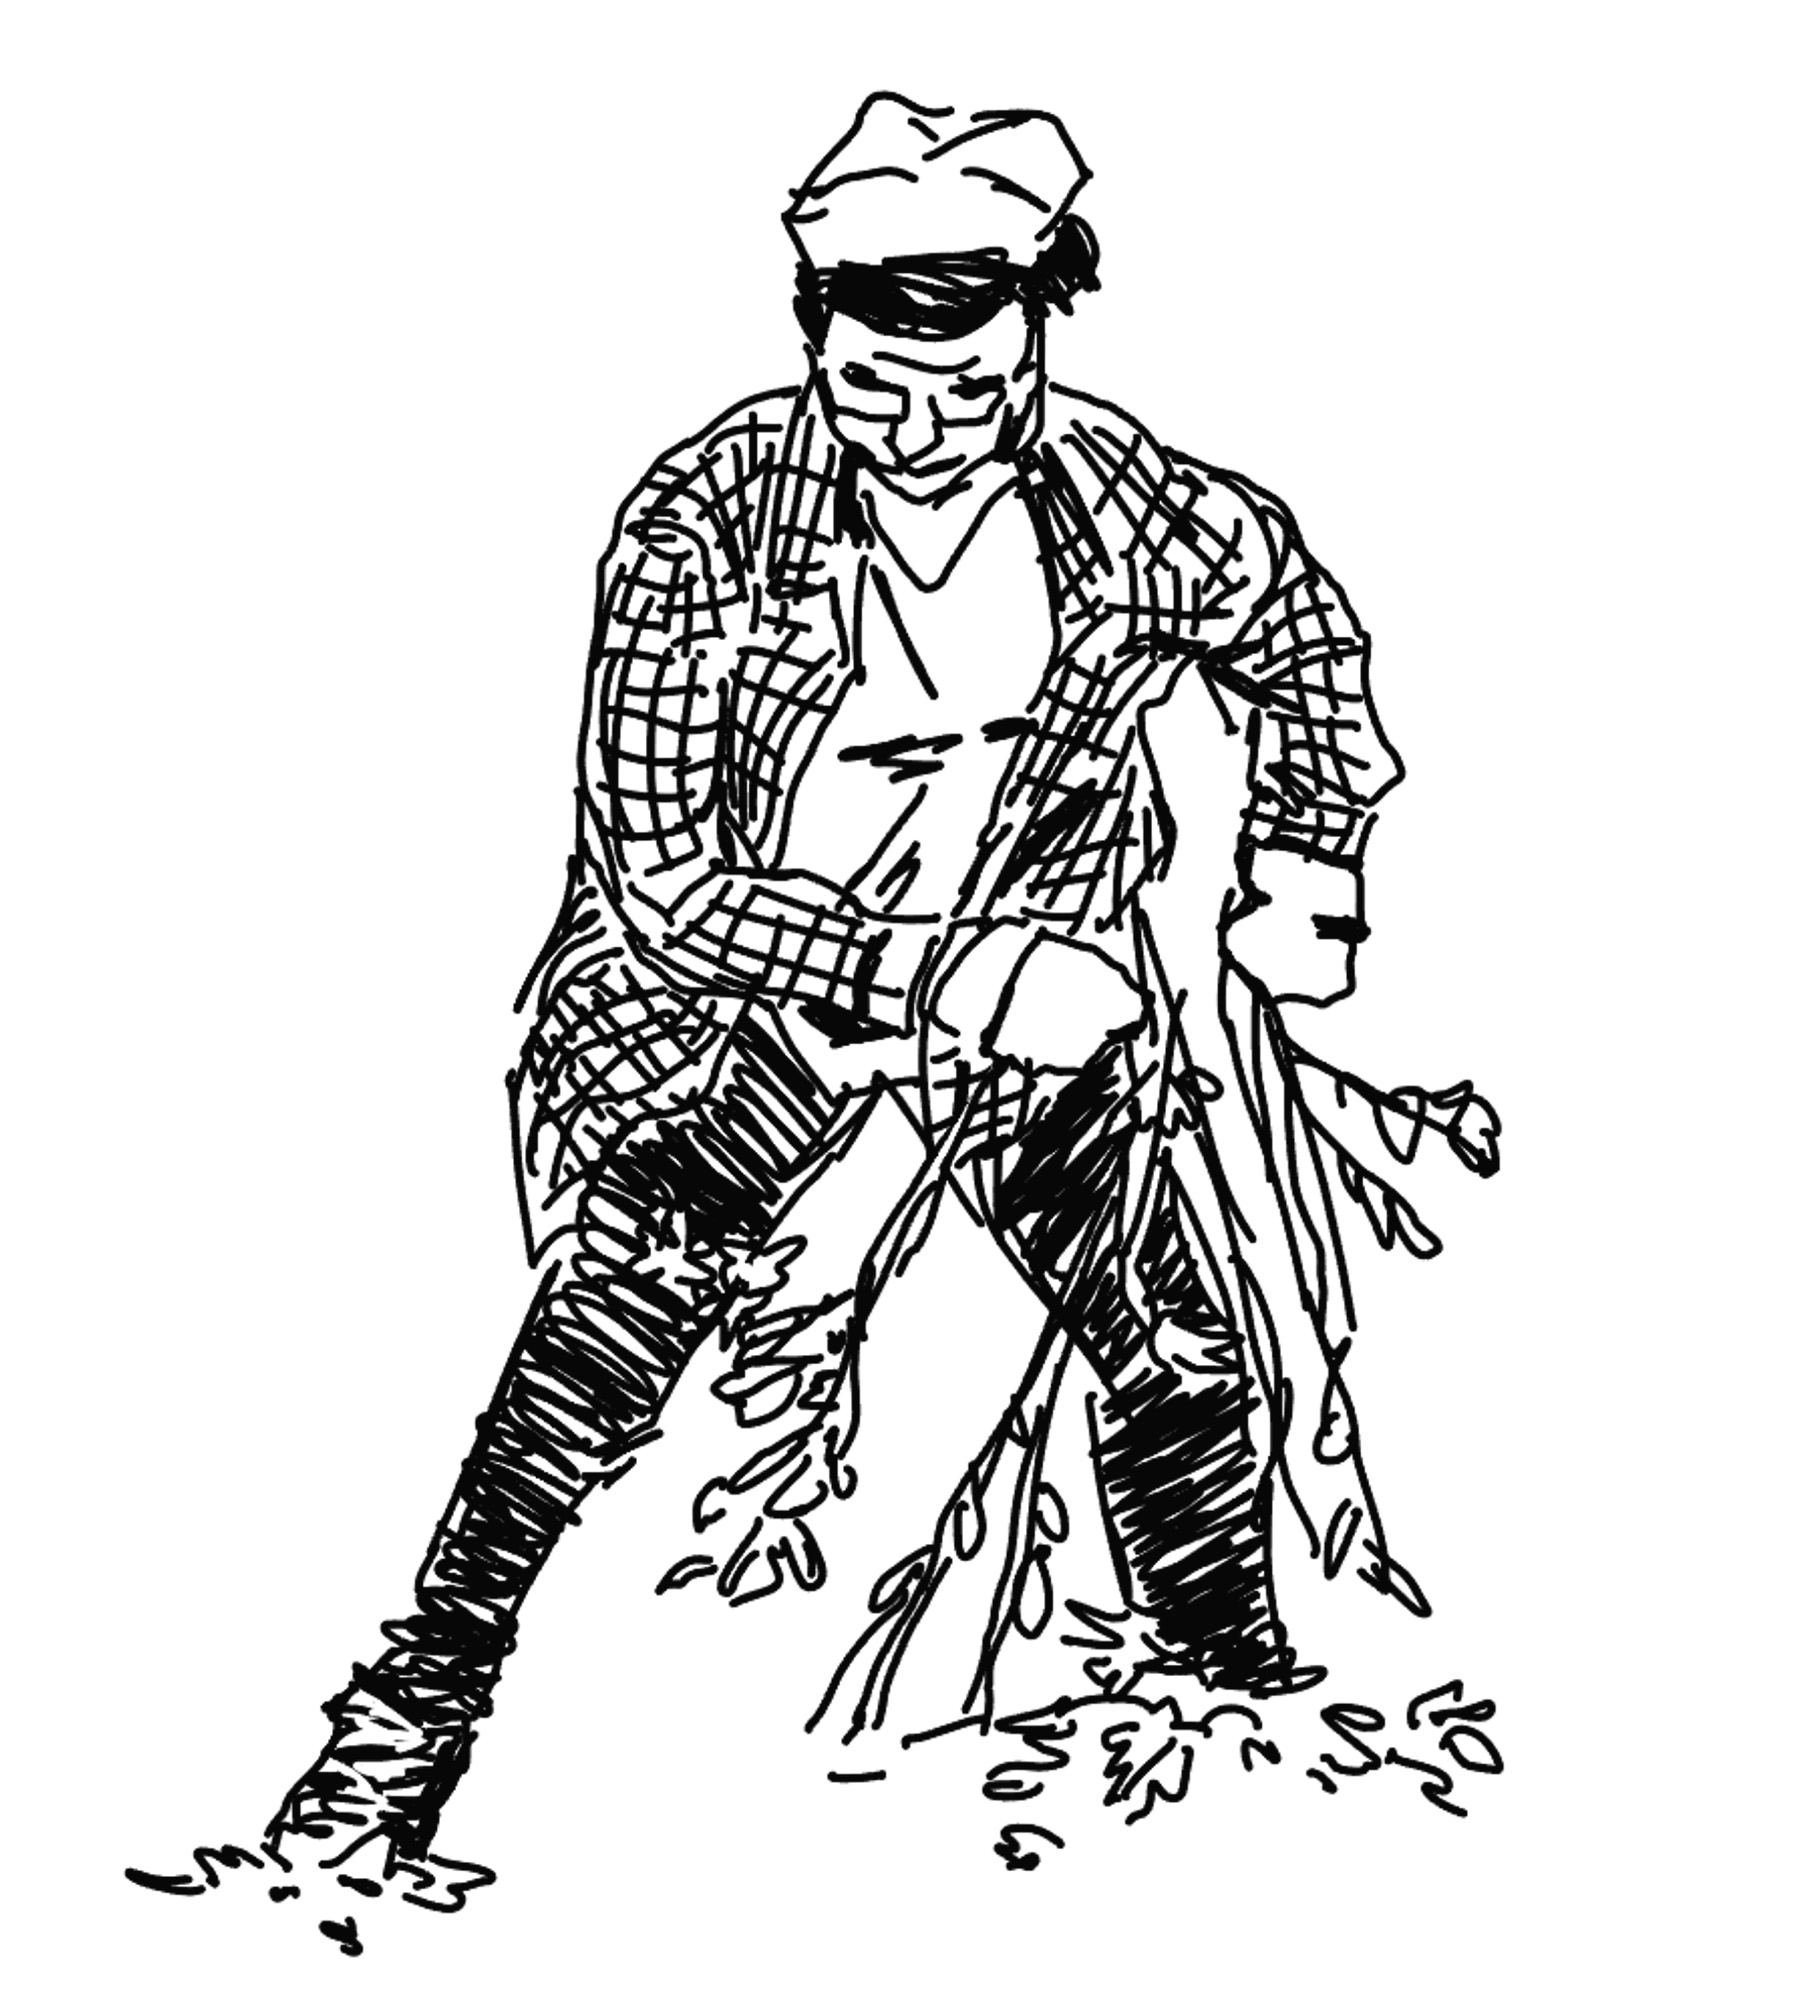 black and white illustration of a person pulling weeds